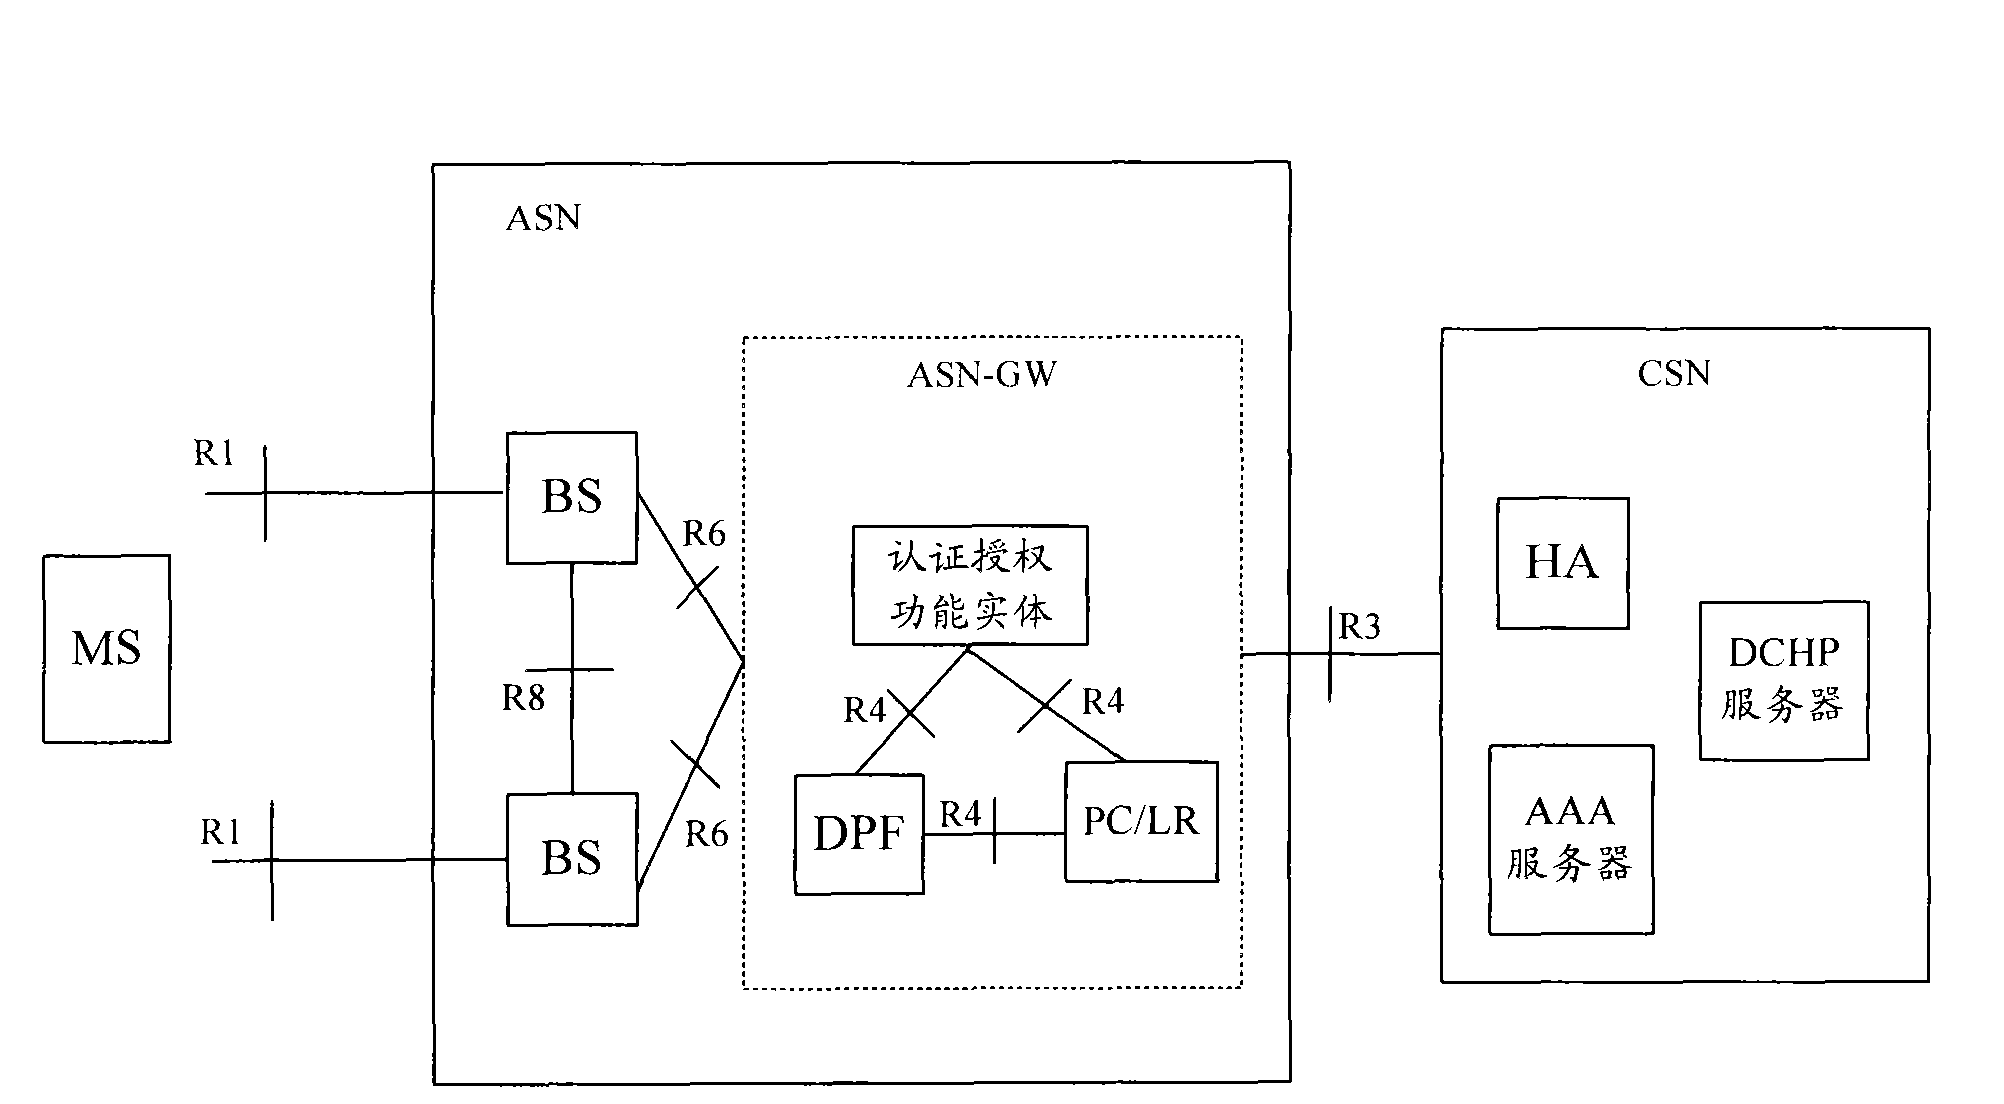 Method and device for keeping consistent user states in all network elements of ASN